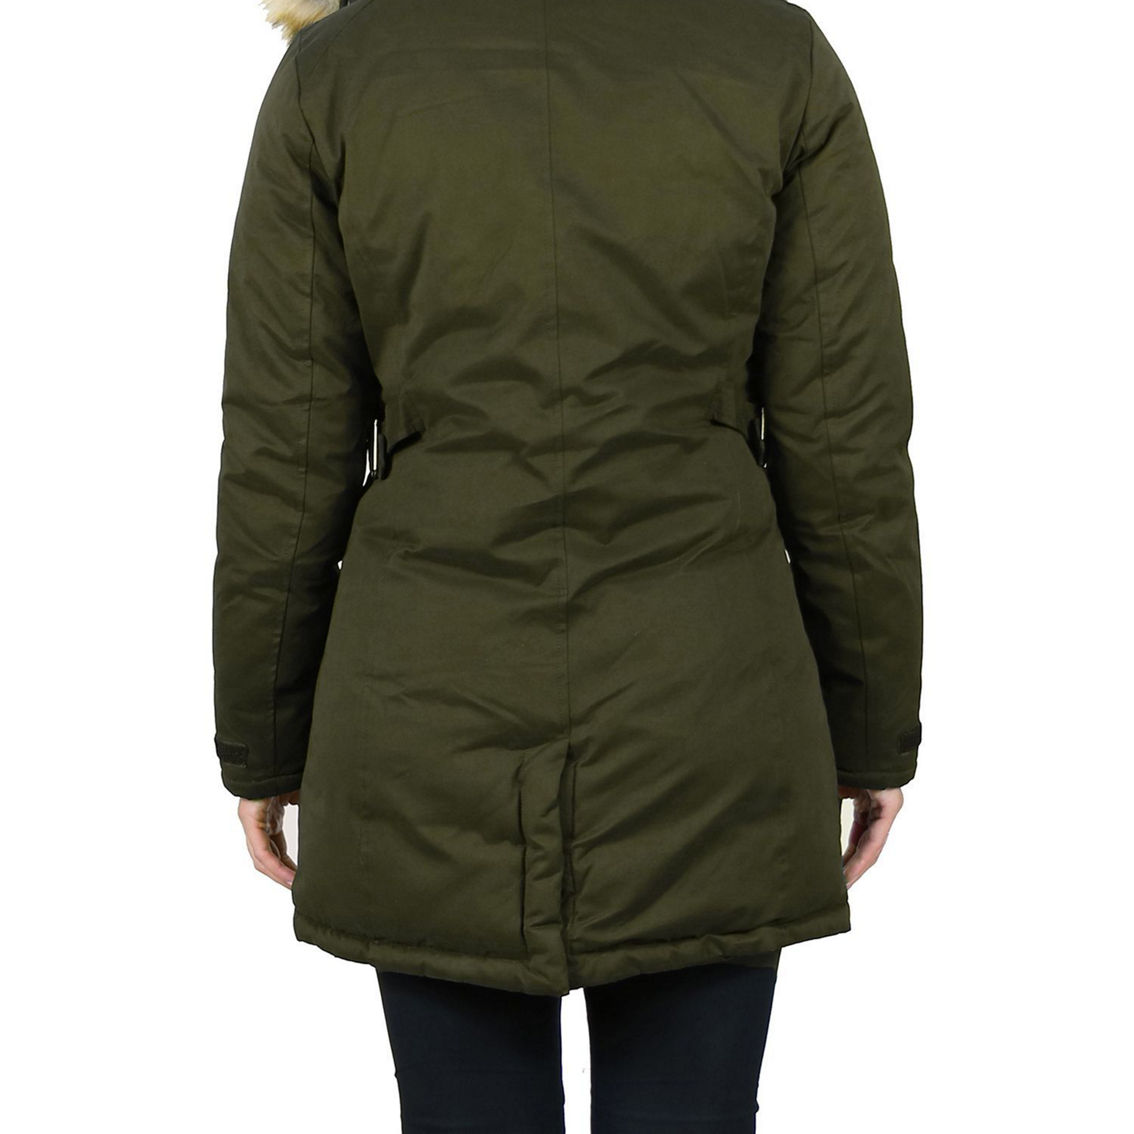 Spire By Galaxy Women's Heavyweight Parka Jacket With Detachable Faux Fur Hood - Image 2 of 4